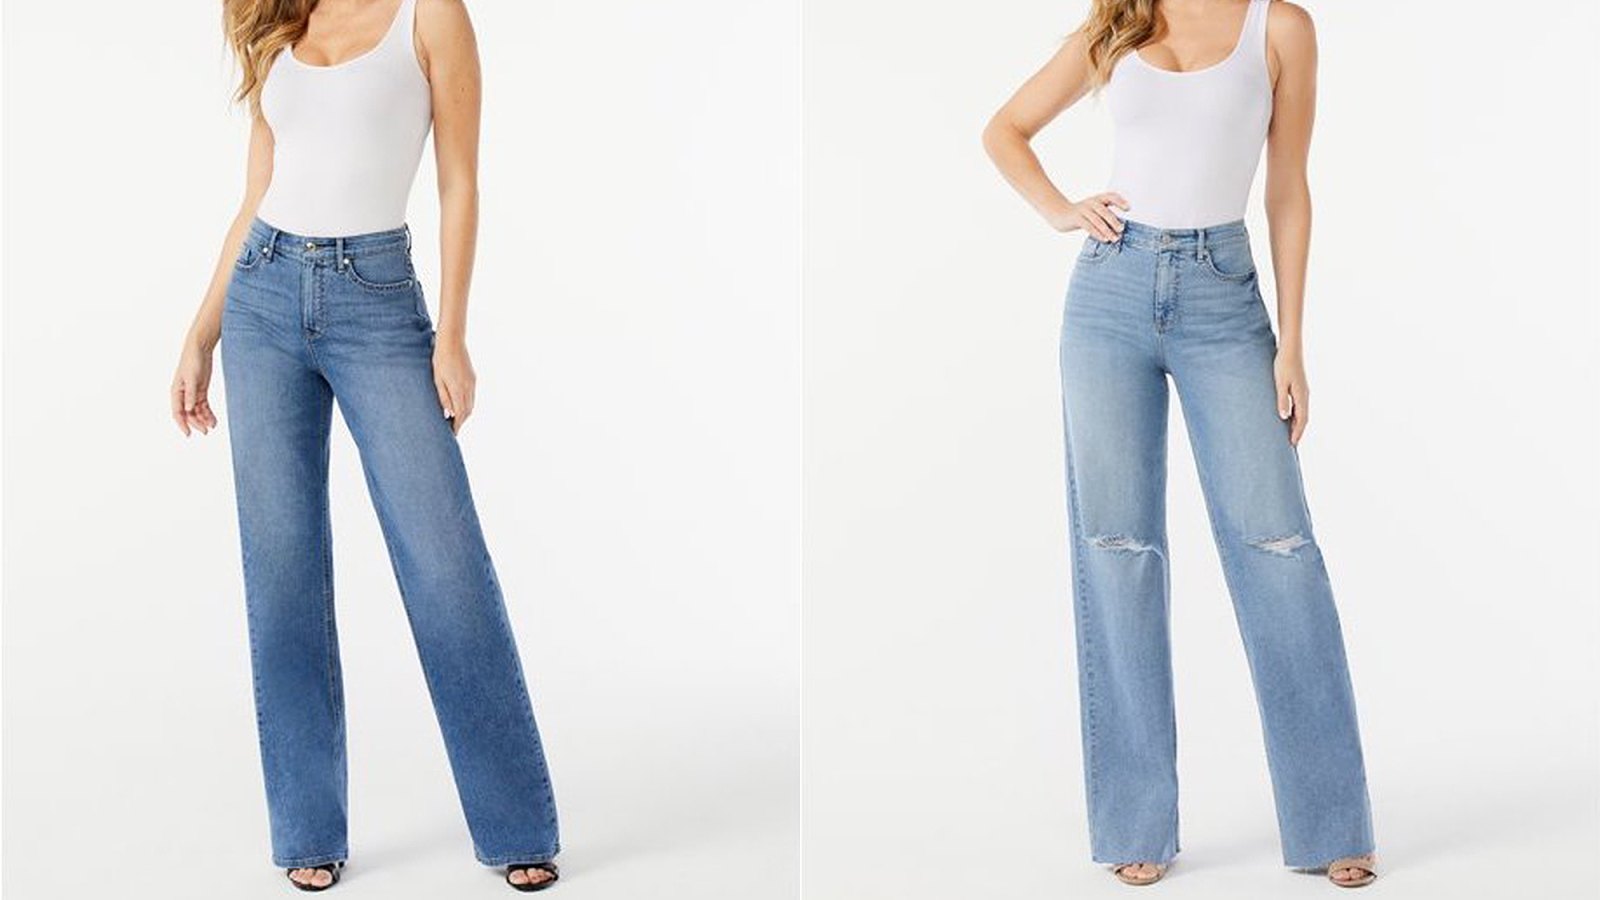 Sofia Jeans Bottoms Are the Denim Equivalent of Palazzo Pants